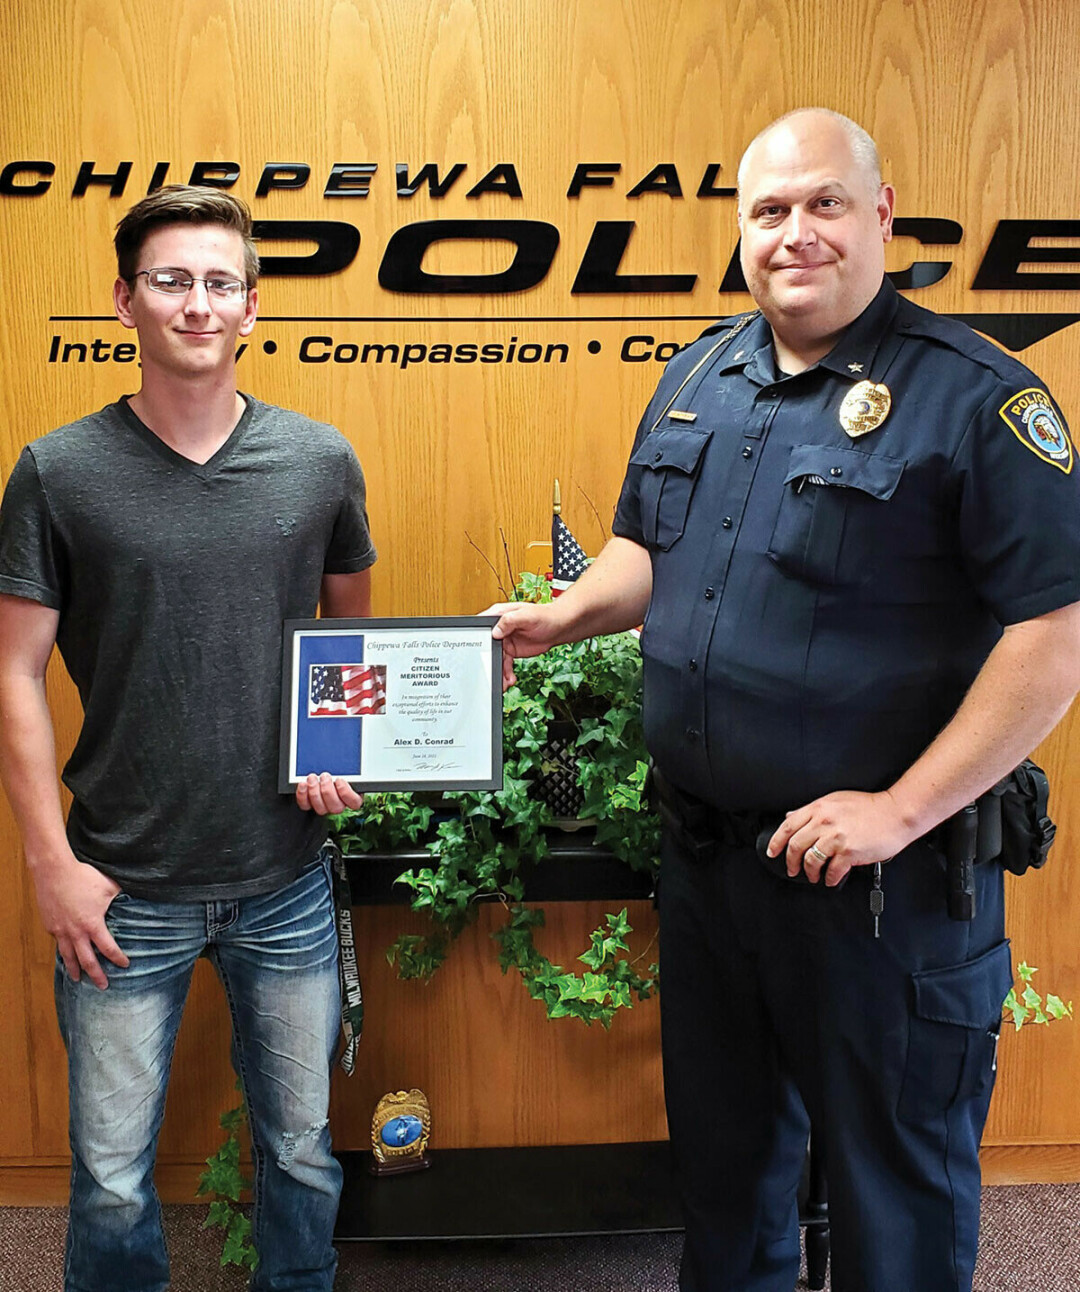 DO THE RIGHT THING. Alex Conrad, left, was honored by Chippewa Falls Police Chief Matthew Kelm. (Submitted photo)